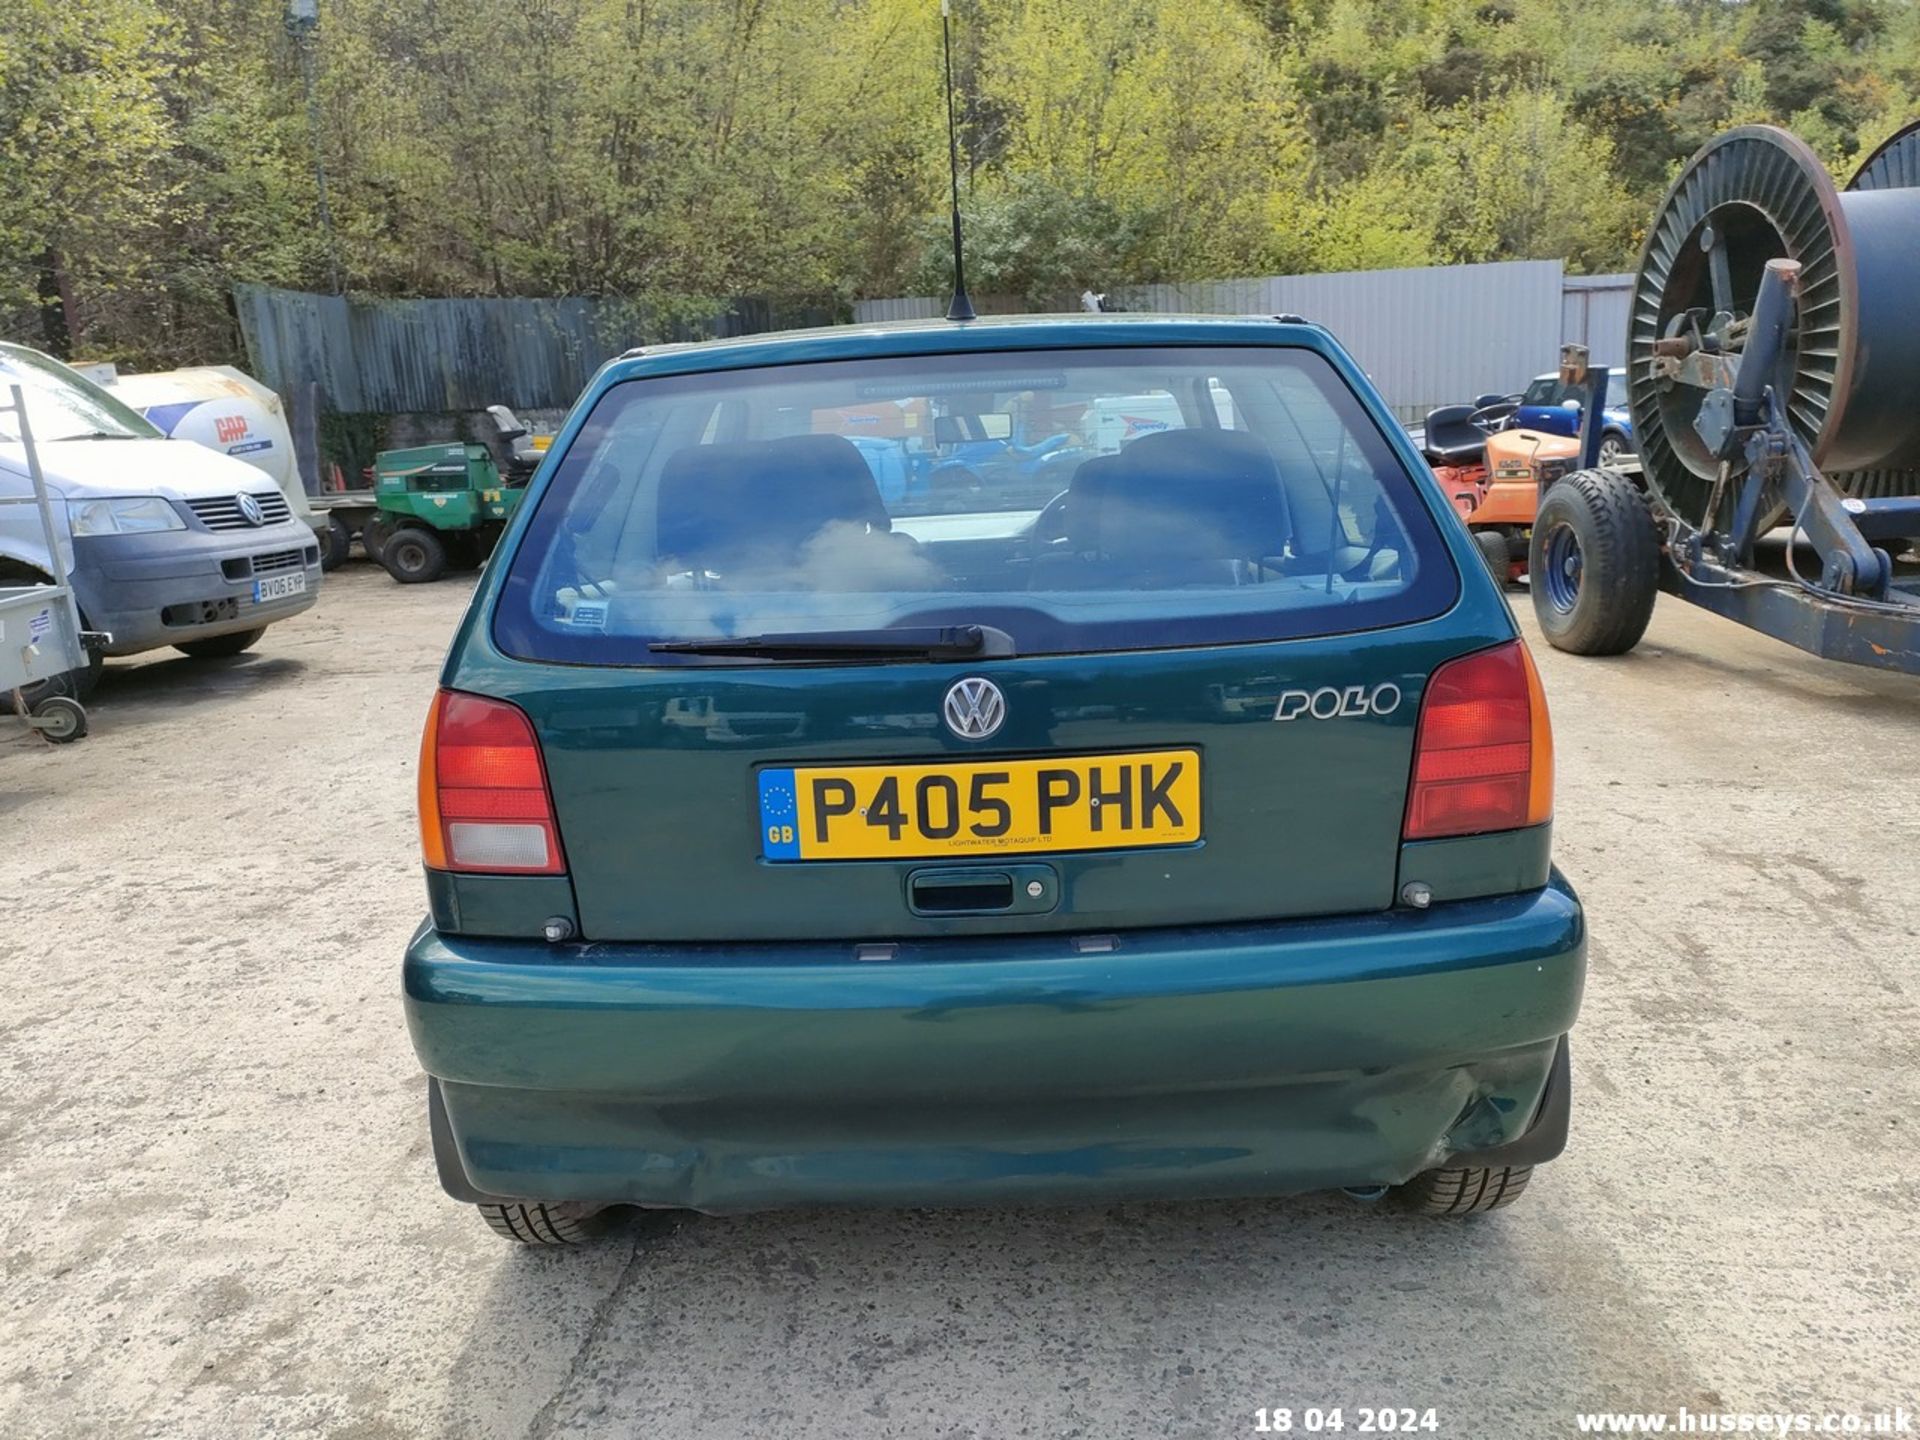 1997 VOLKSWAGEN POLO 1.4 CL AUTO - 1390cc 3dr Hatchback (Green, 68k) - Image 31 of 60